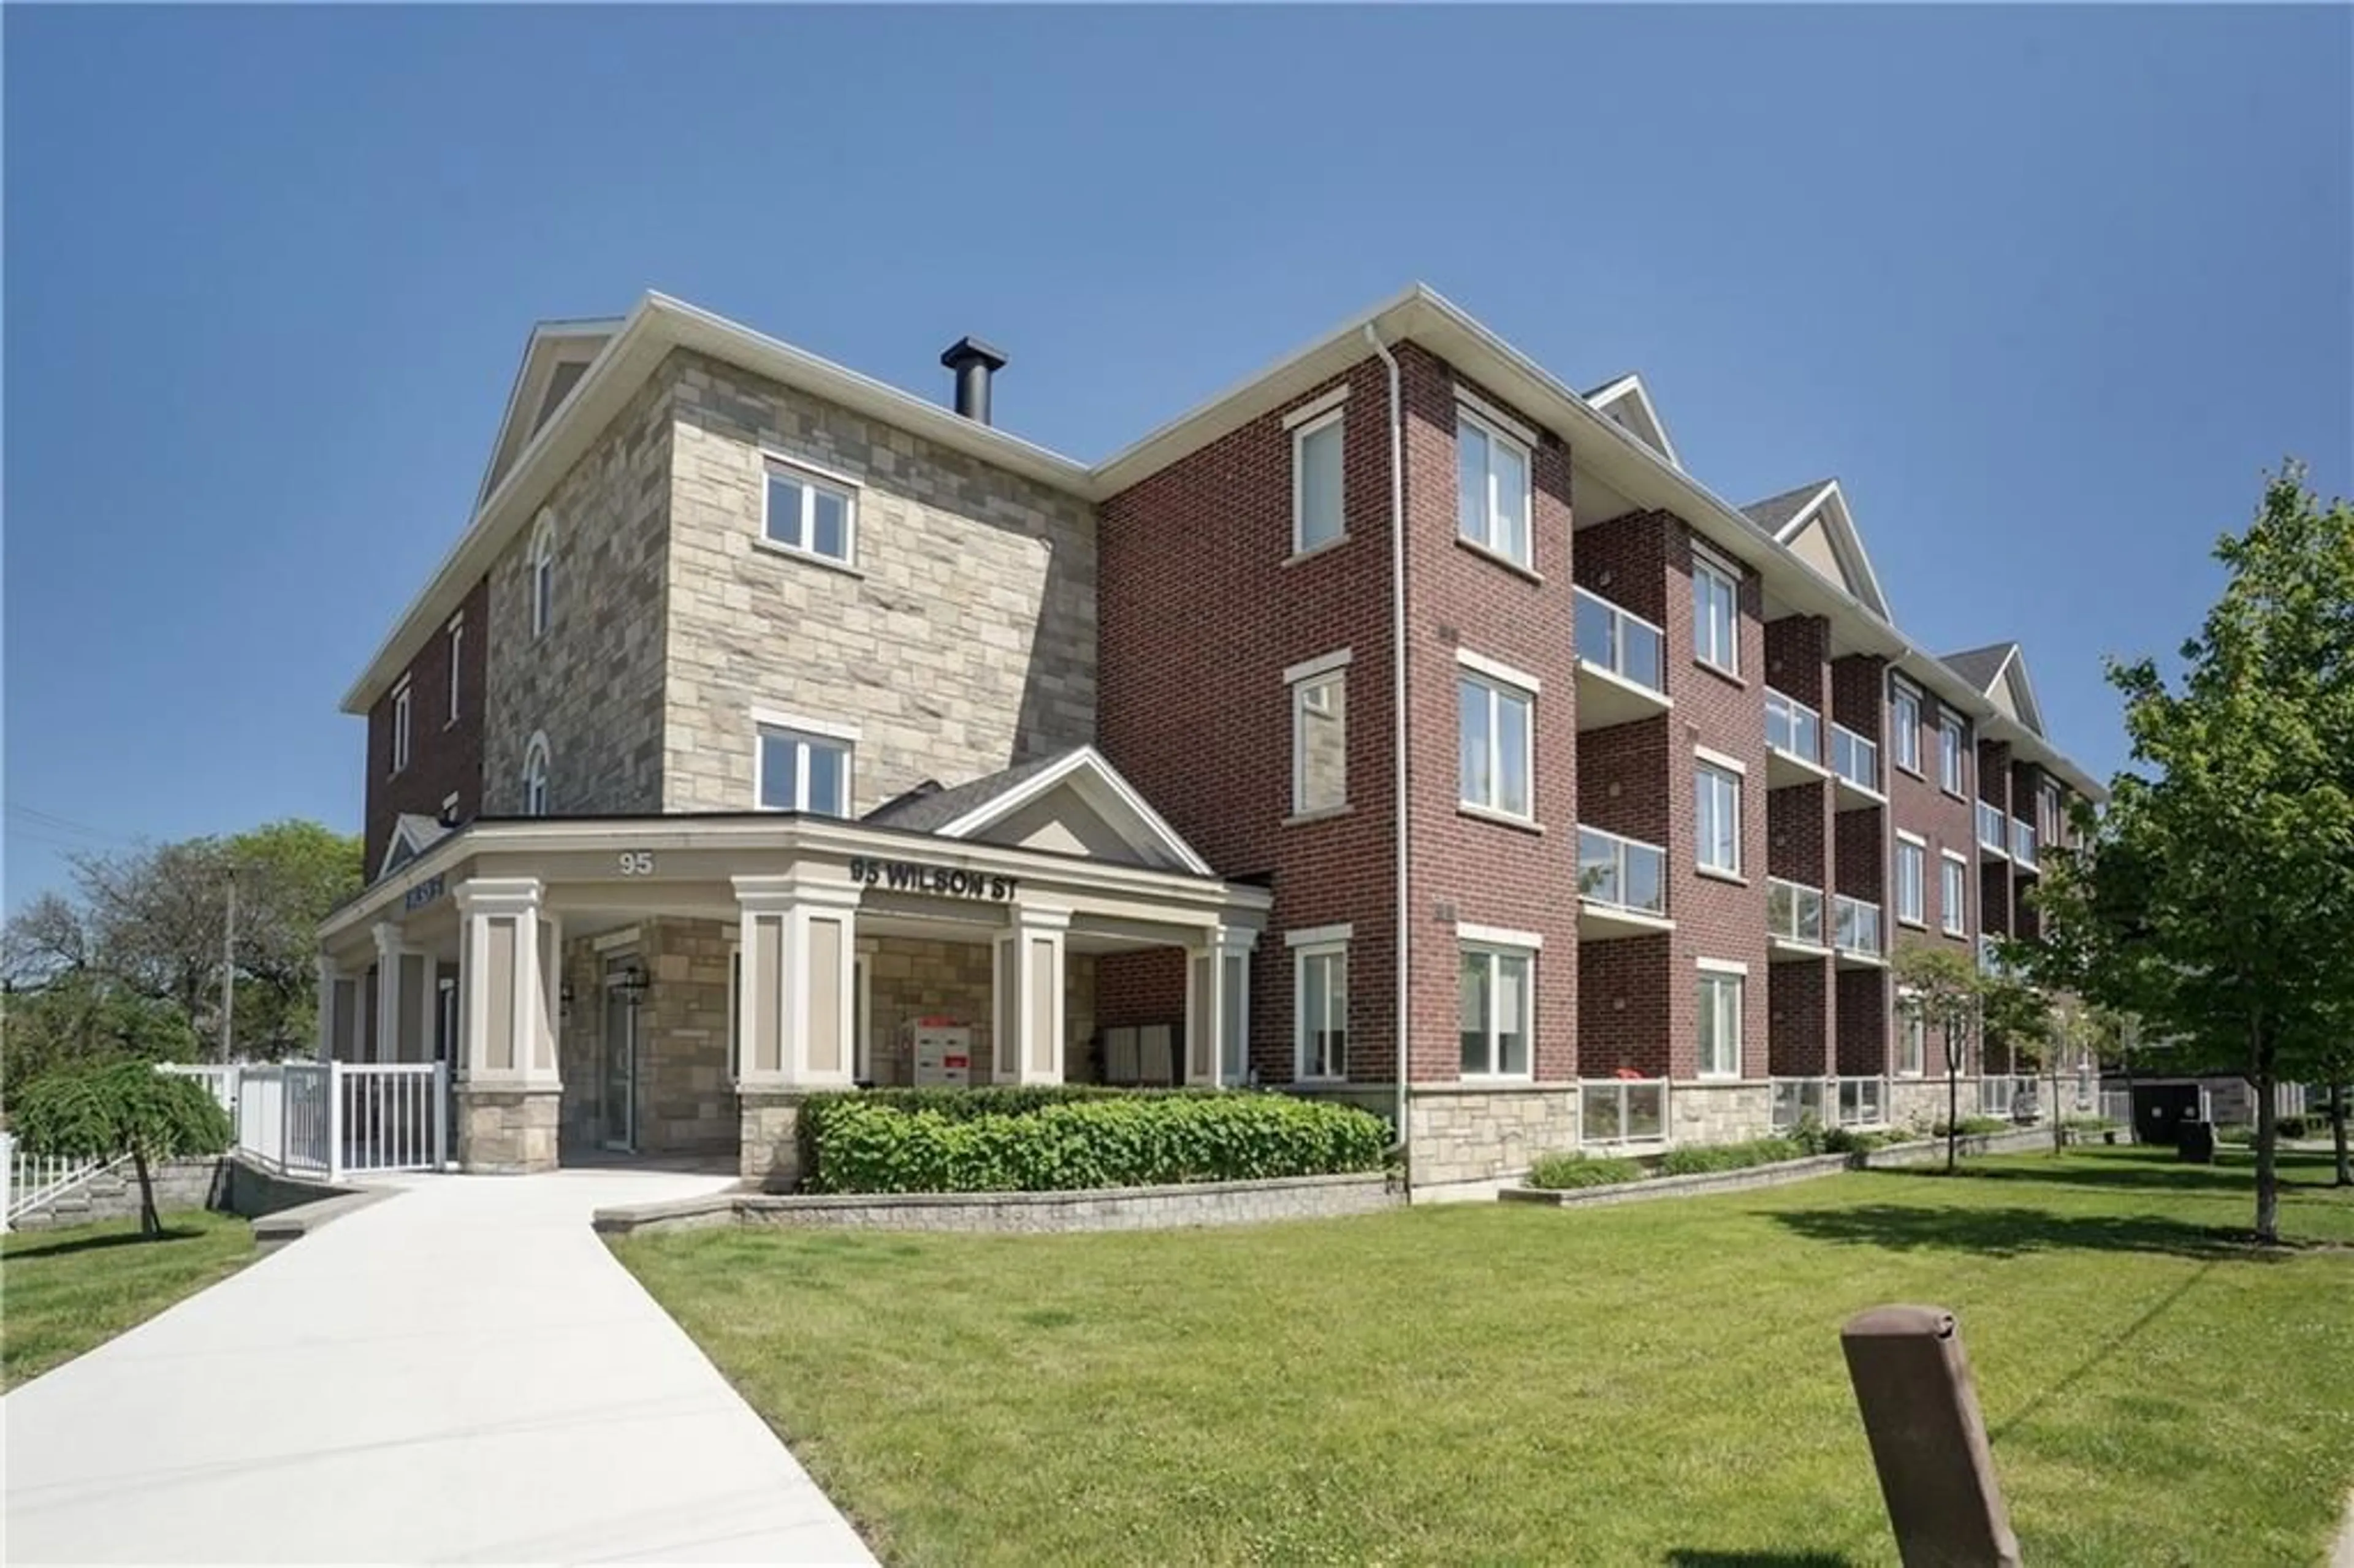 A pic from exterior of the house or condo for 95 Wilson St #112, Ancaster Ontario L9G 1N1